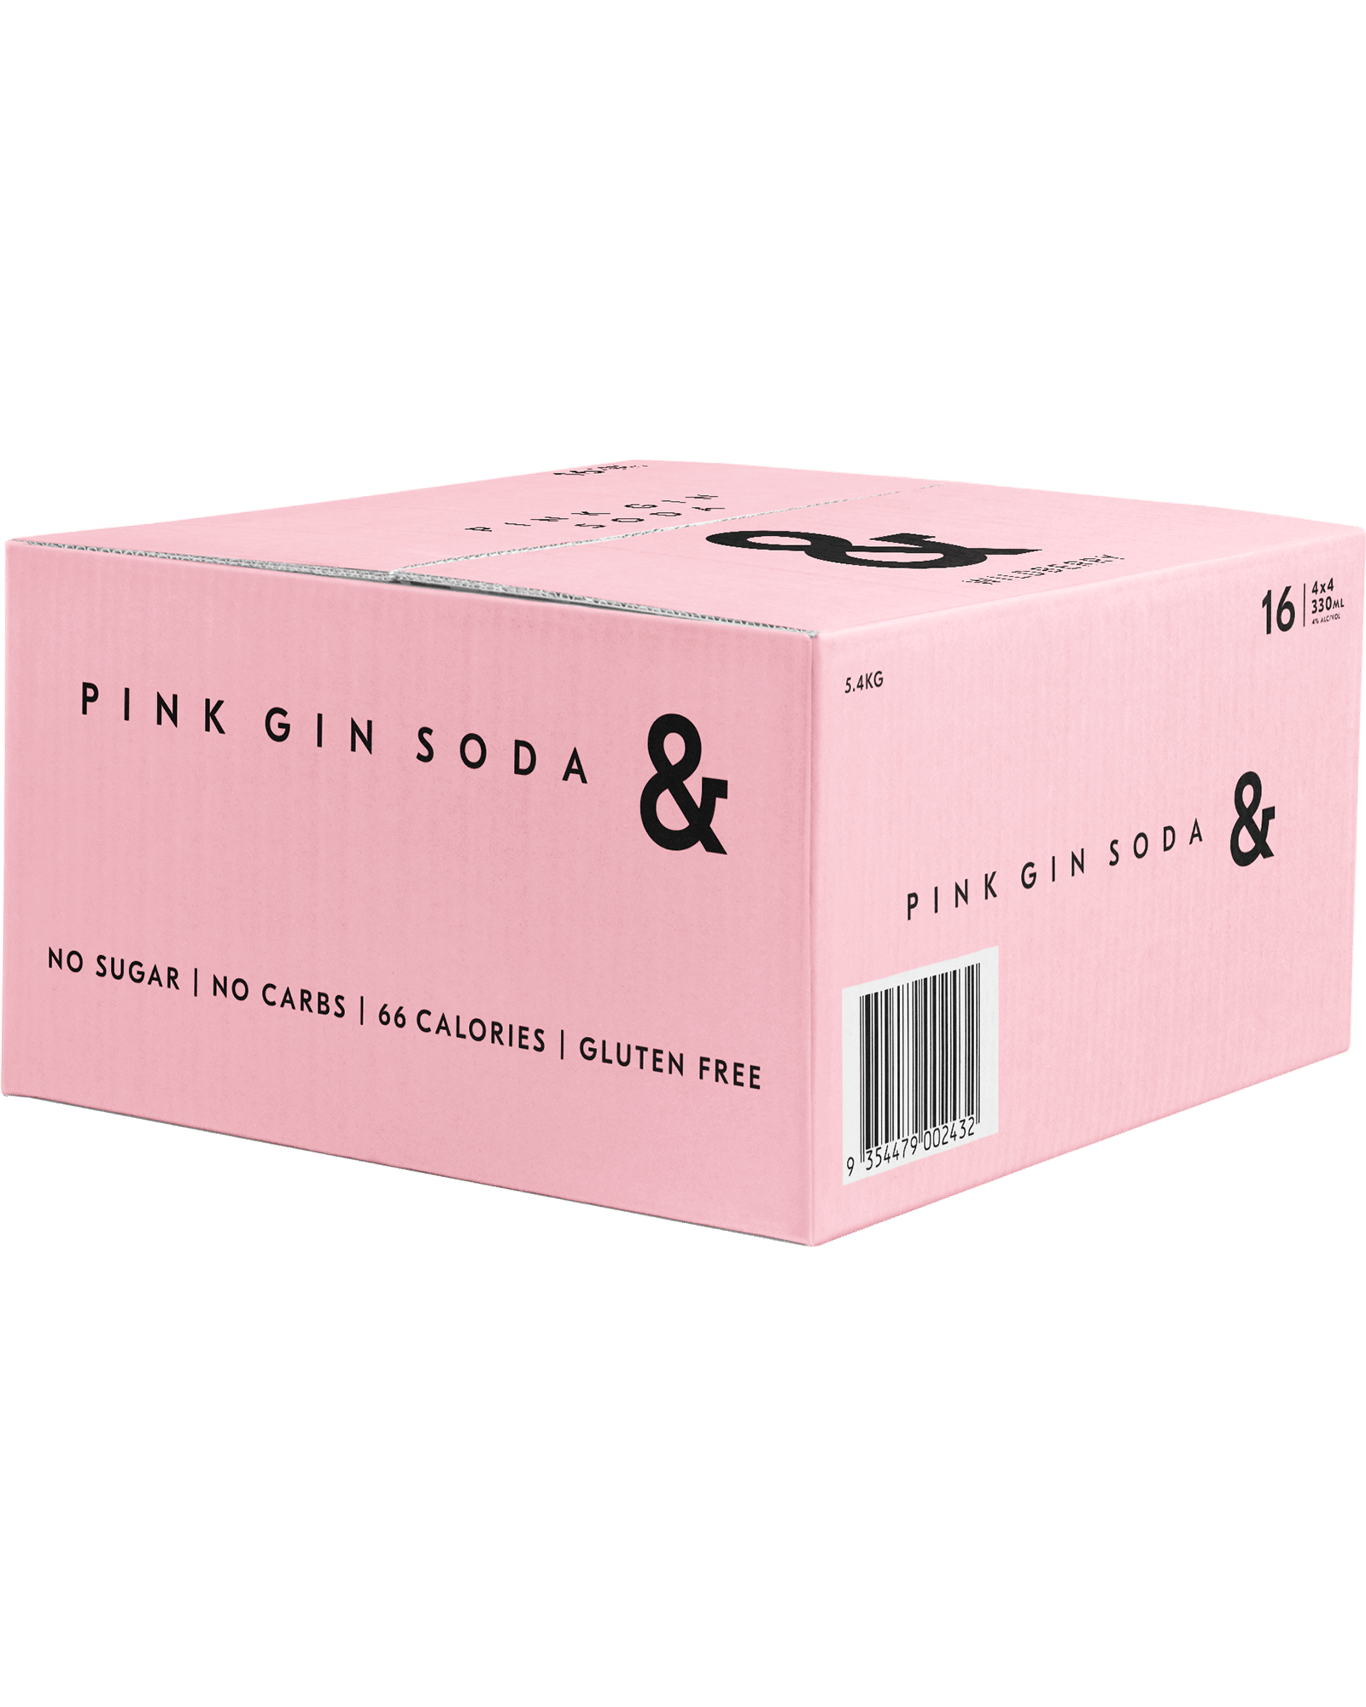 Buy Ampersand Pink Gin Soda And 4 Cans 330ml Online Lowest Price Guarantee Best Deals Same